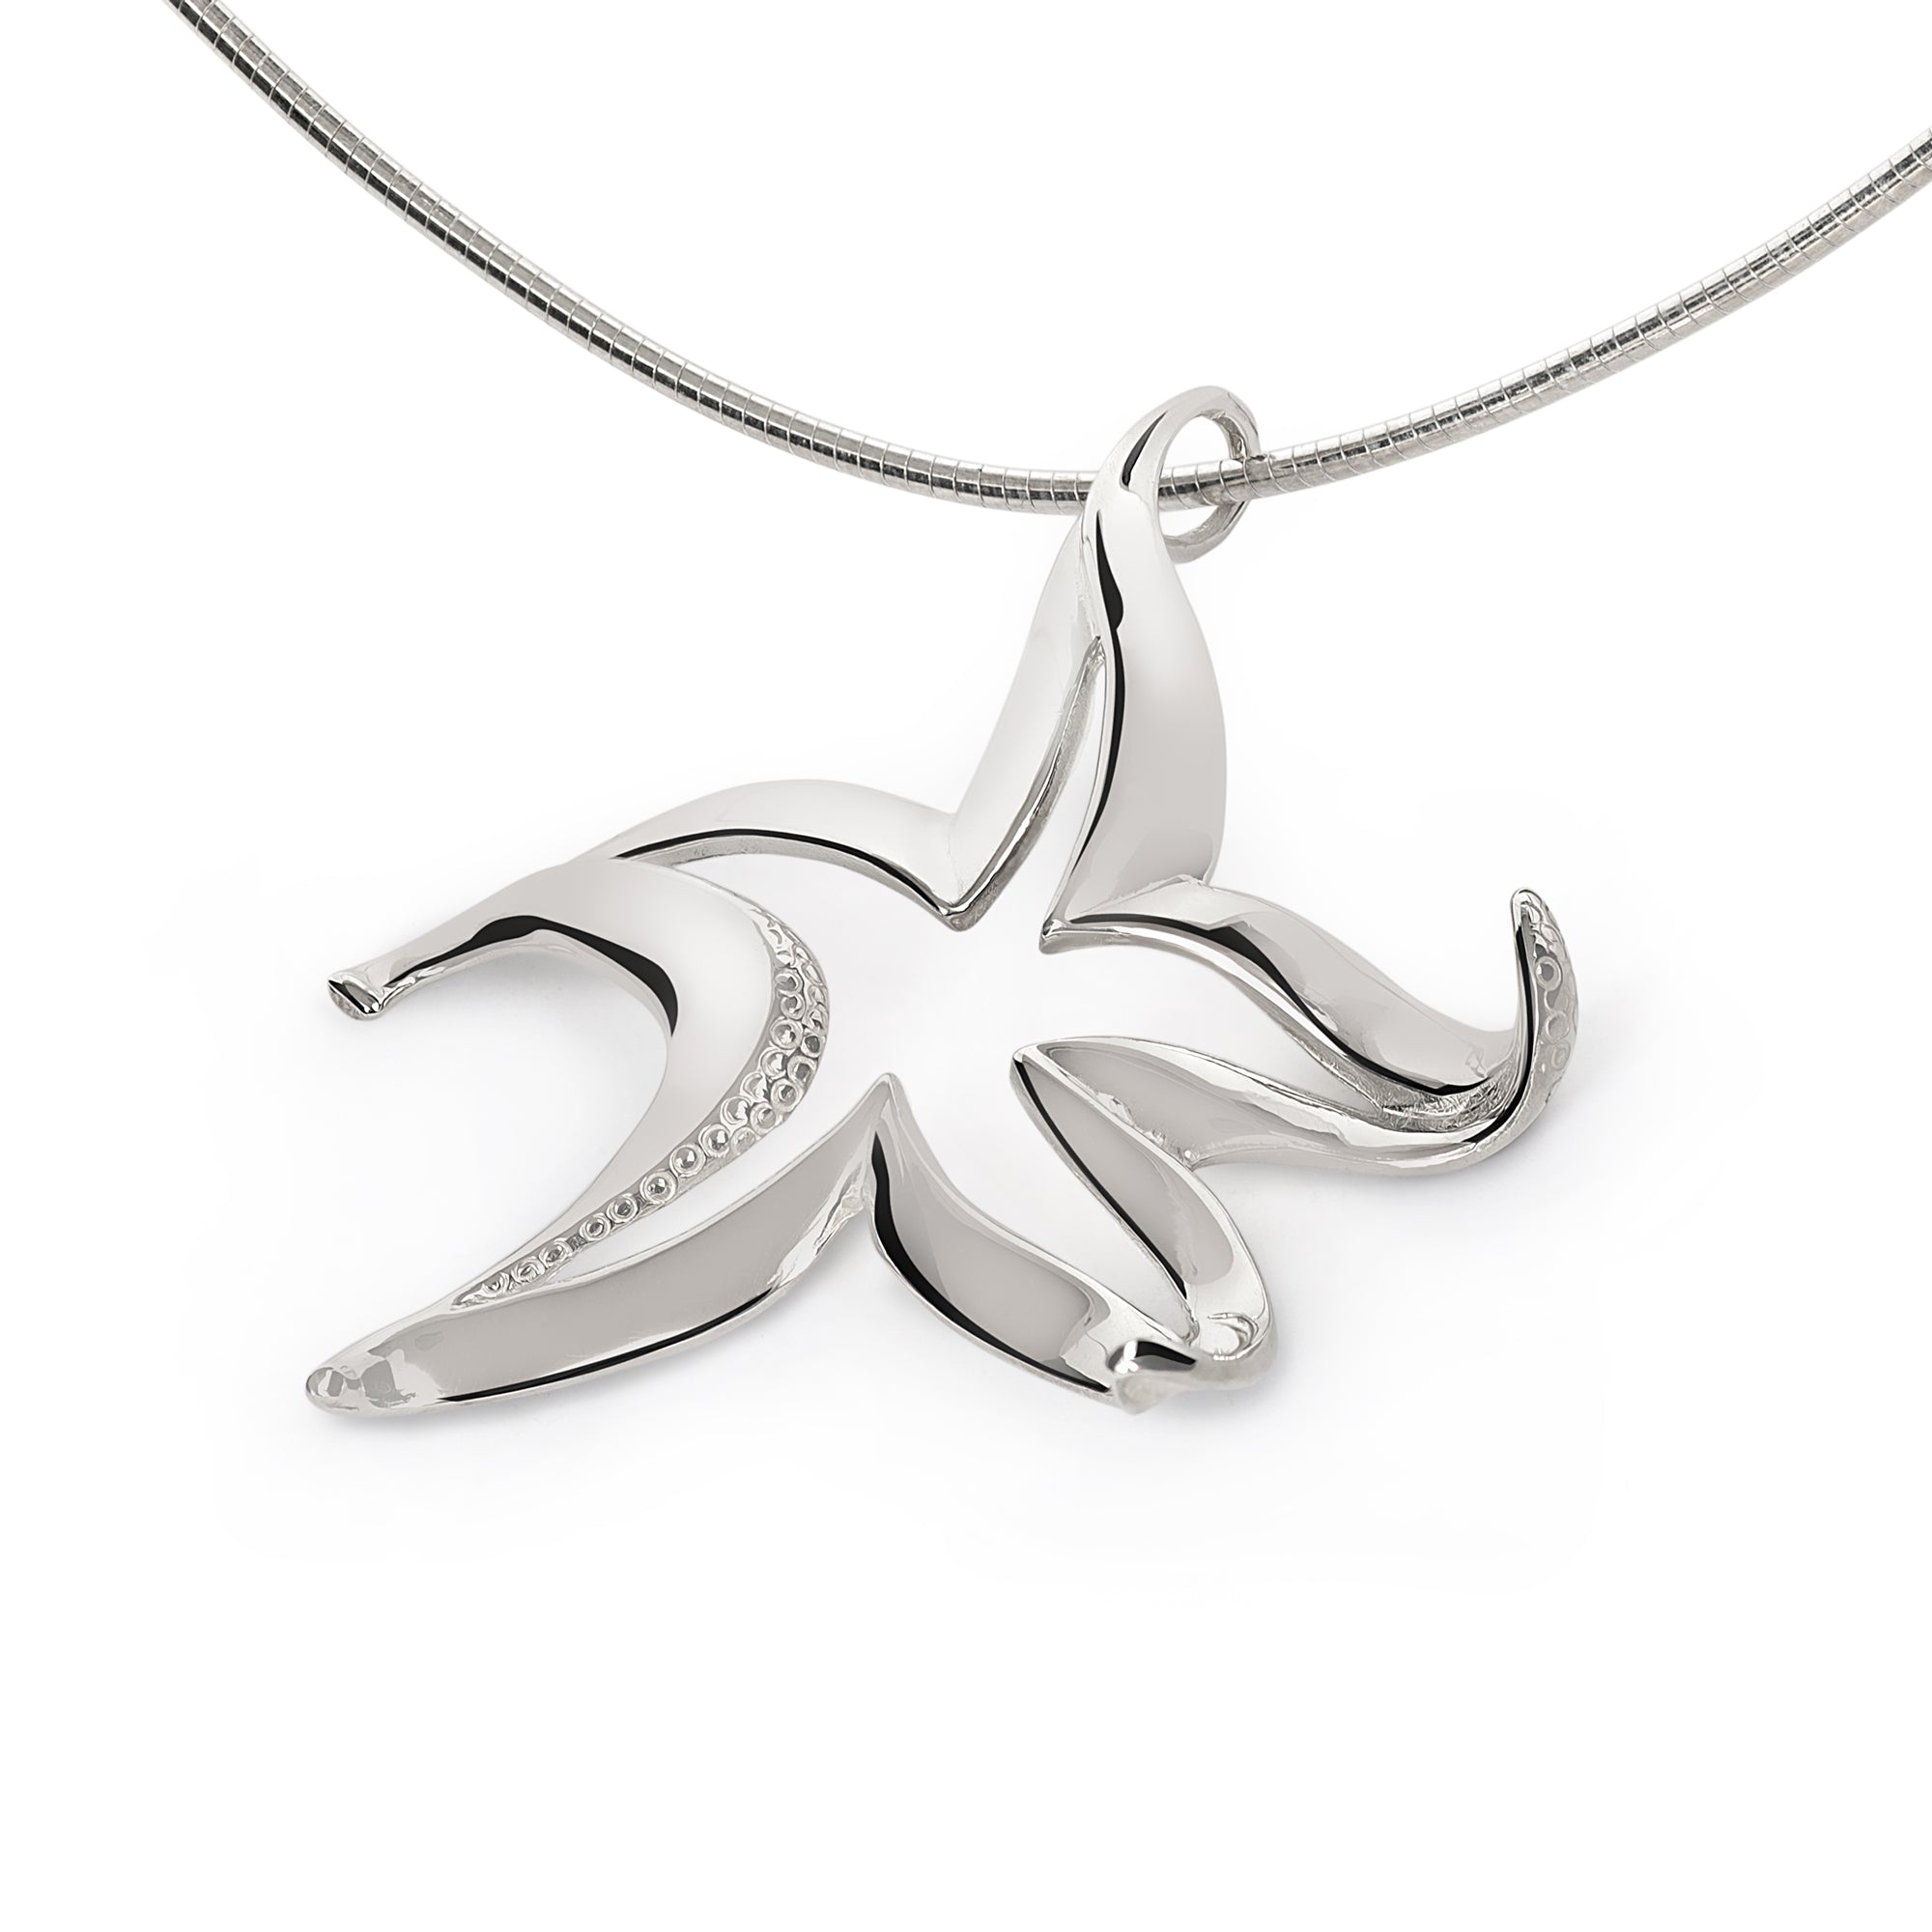 Silver Star Necklace - Sterling Silver Pendant - Women's Jewelry Gold